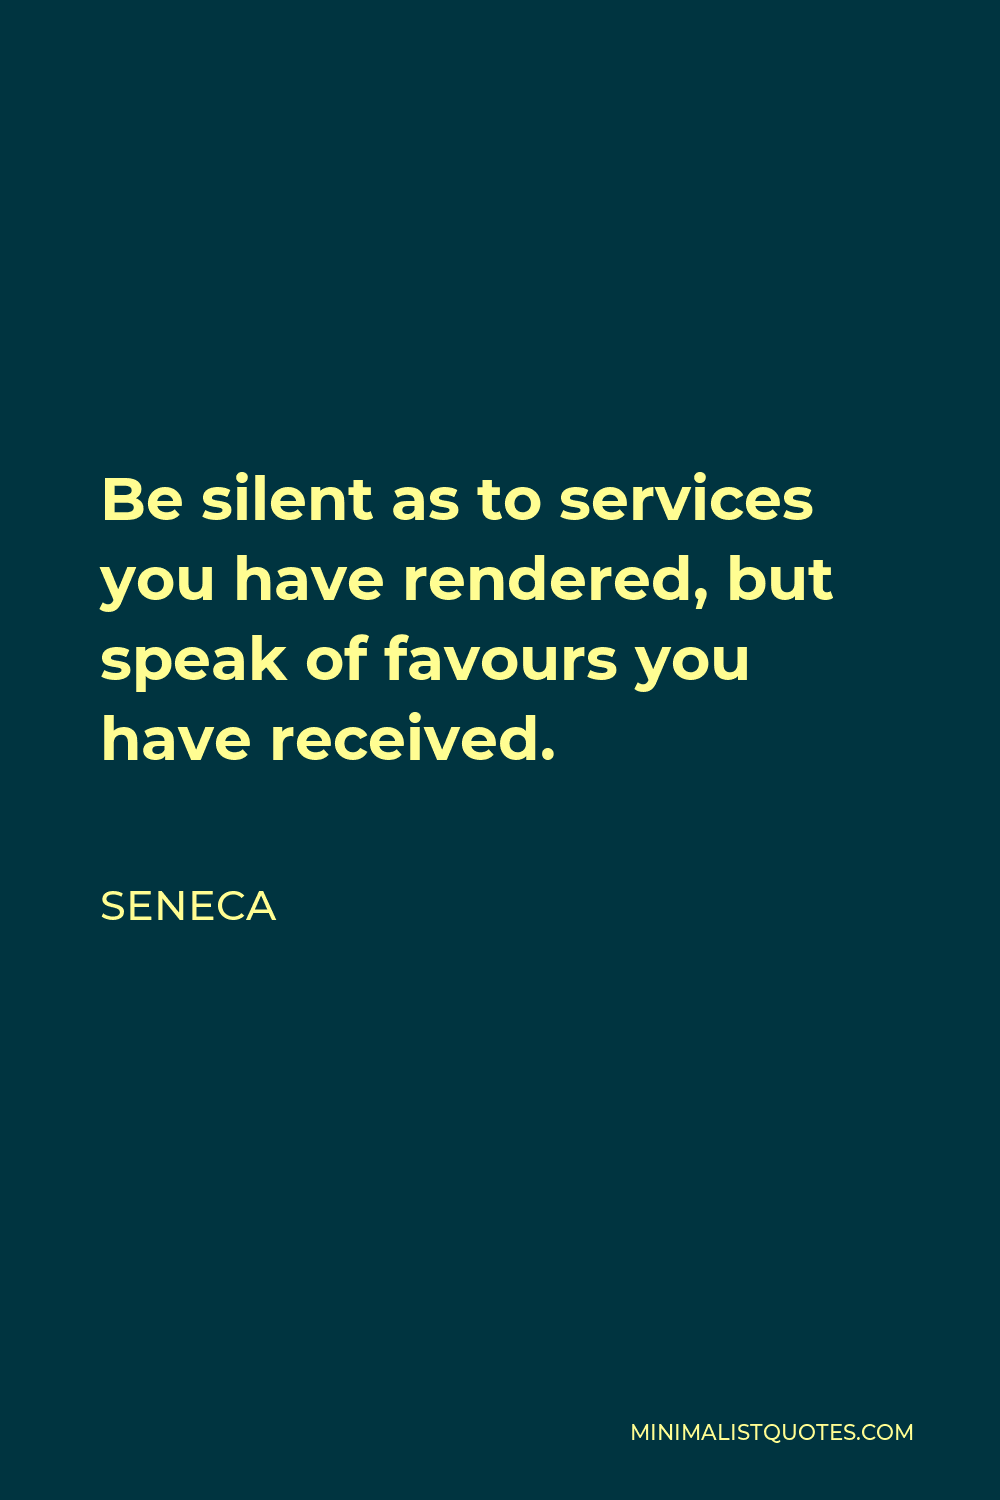 Seneca Quote - Be silent as to services you have rendered, but speak of favours you have received.